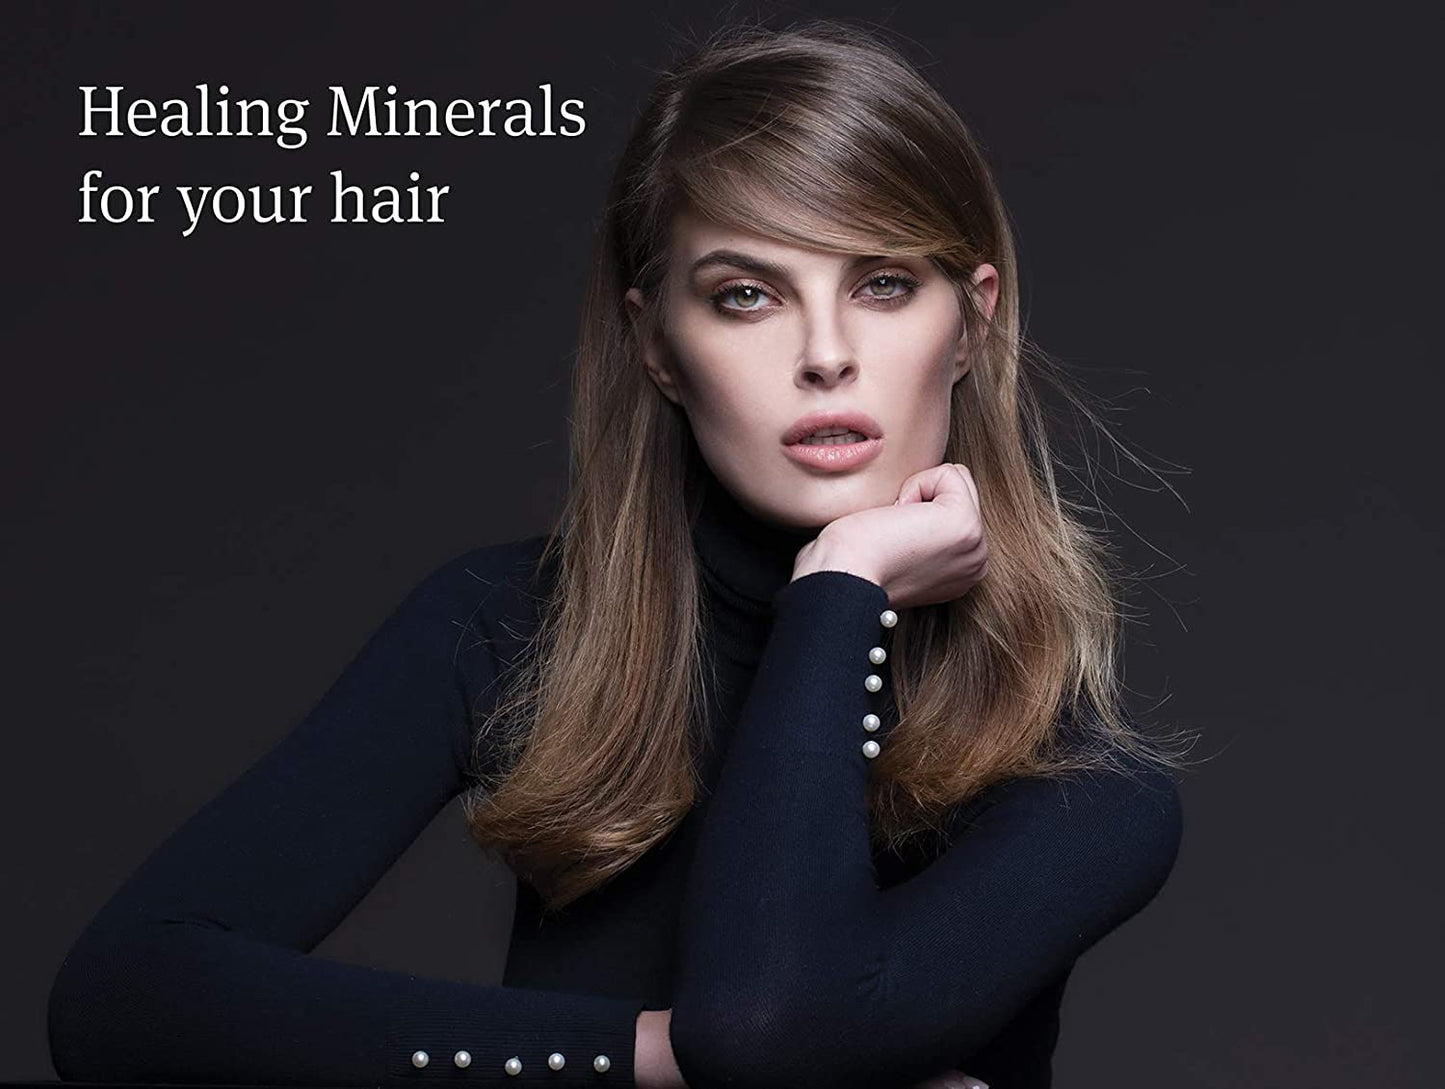 Healing Minerals for Your Hair